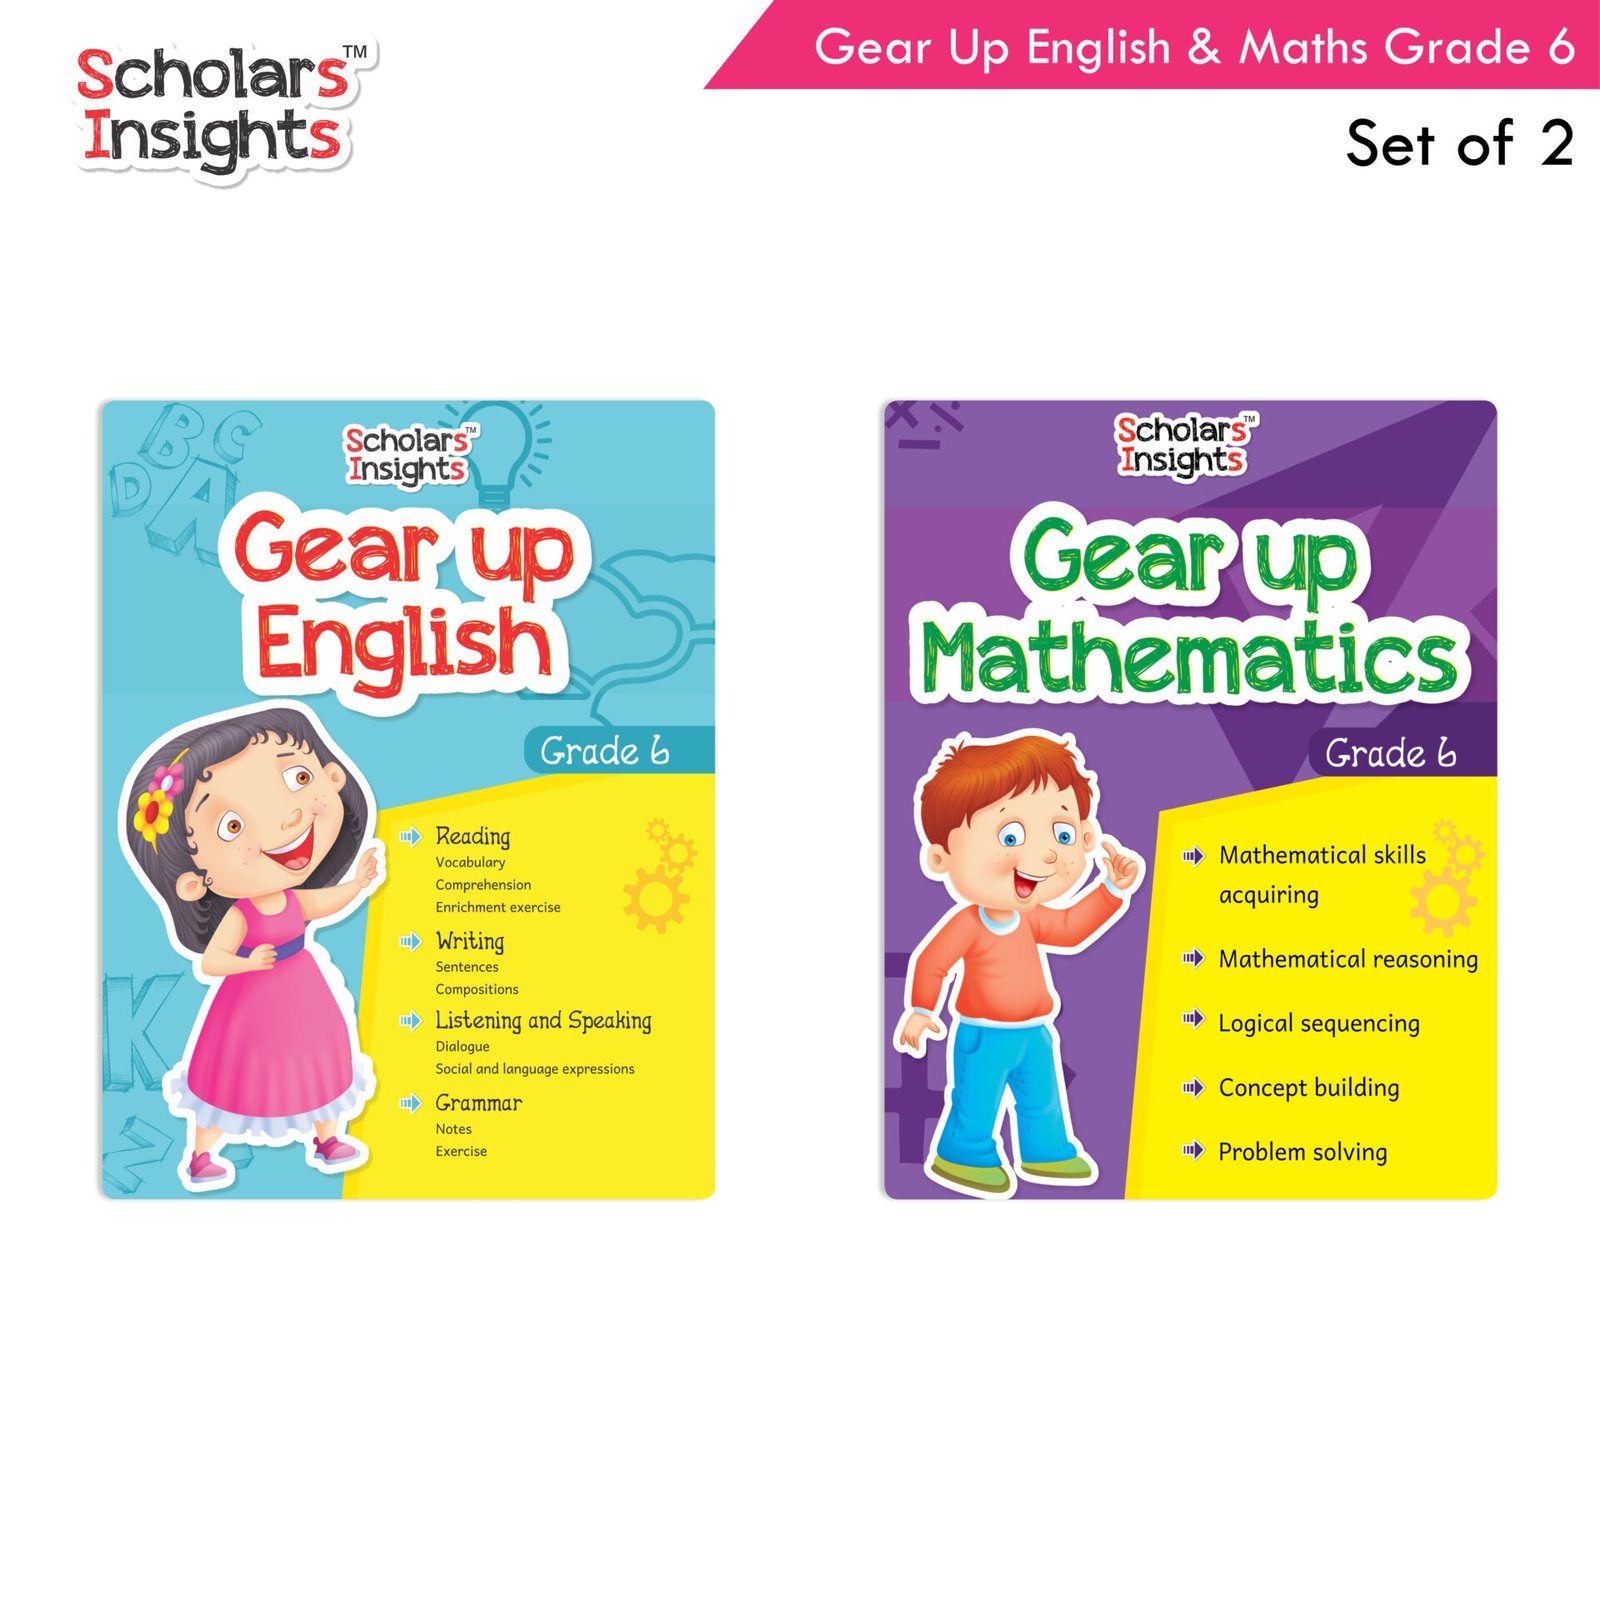 Scholars Insights Gear Up English and Maths Grade 6 Set of 2 1